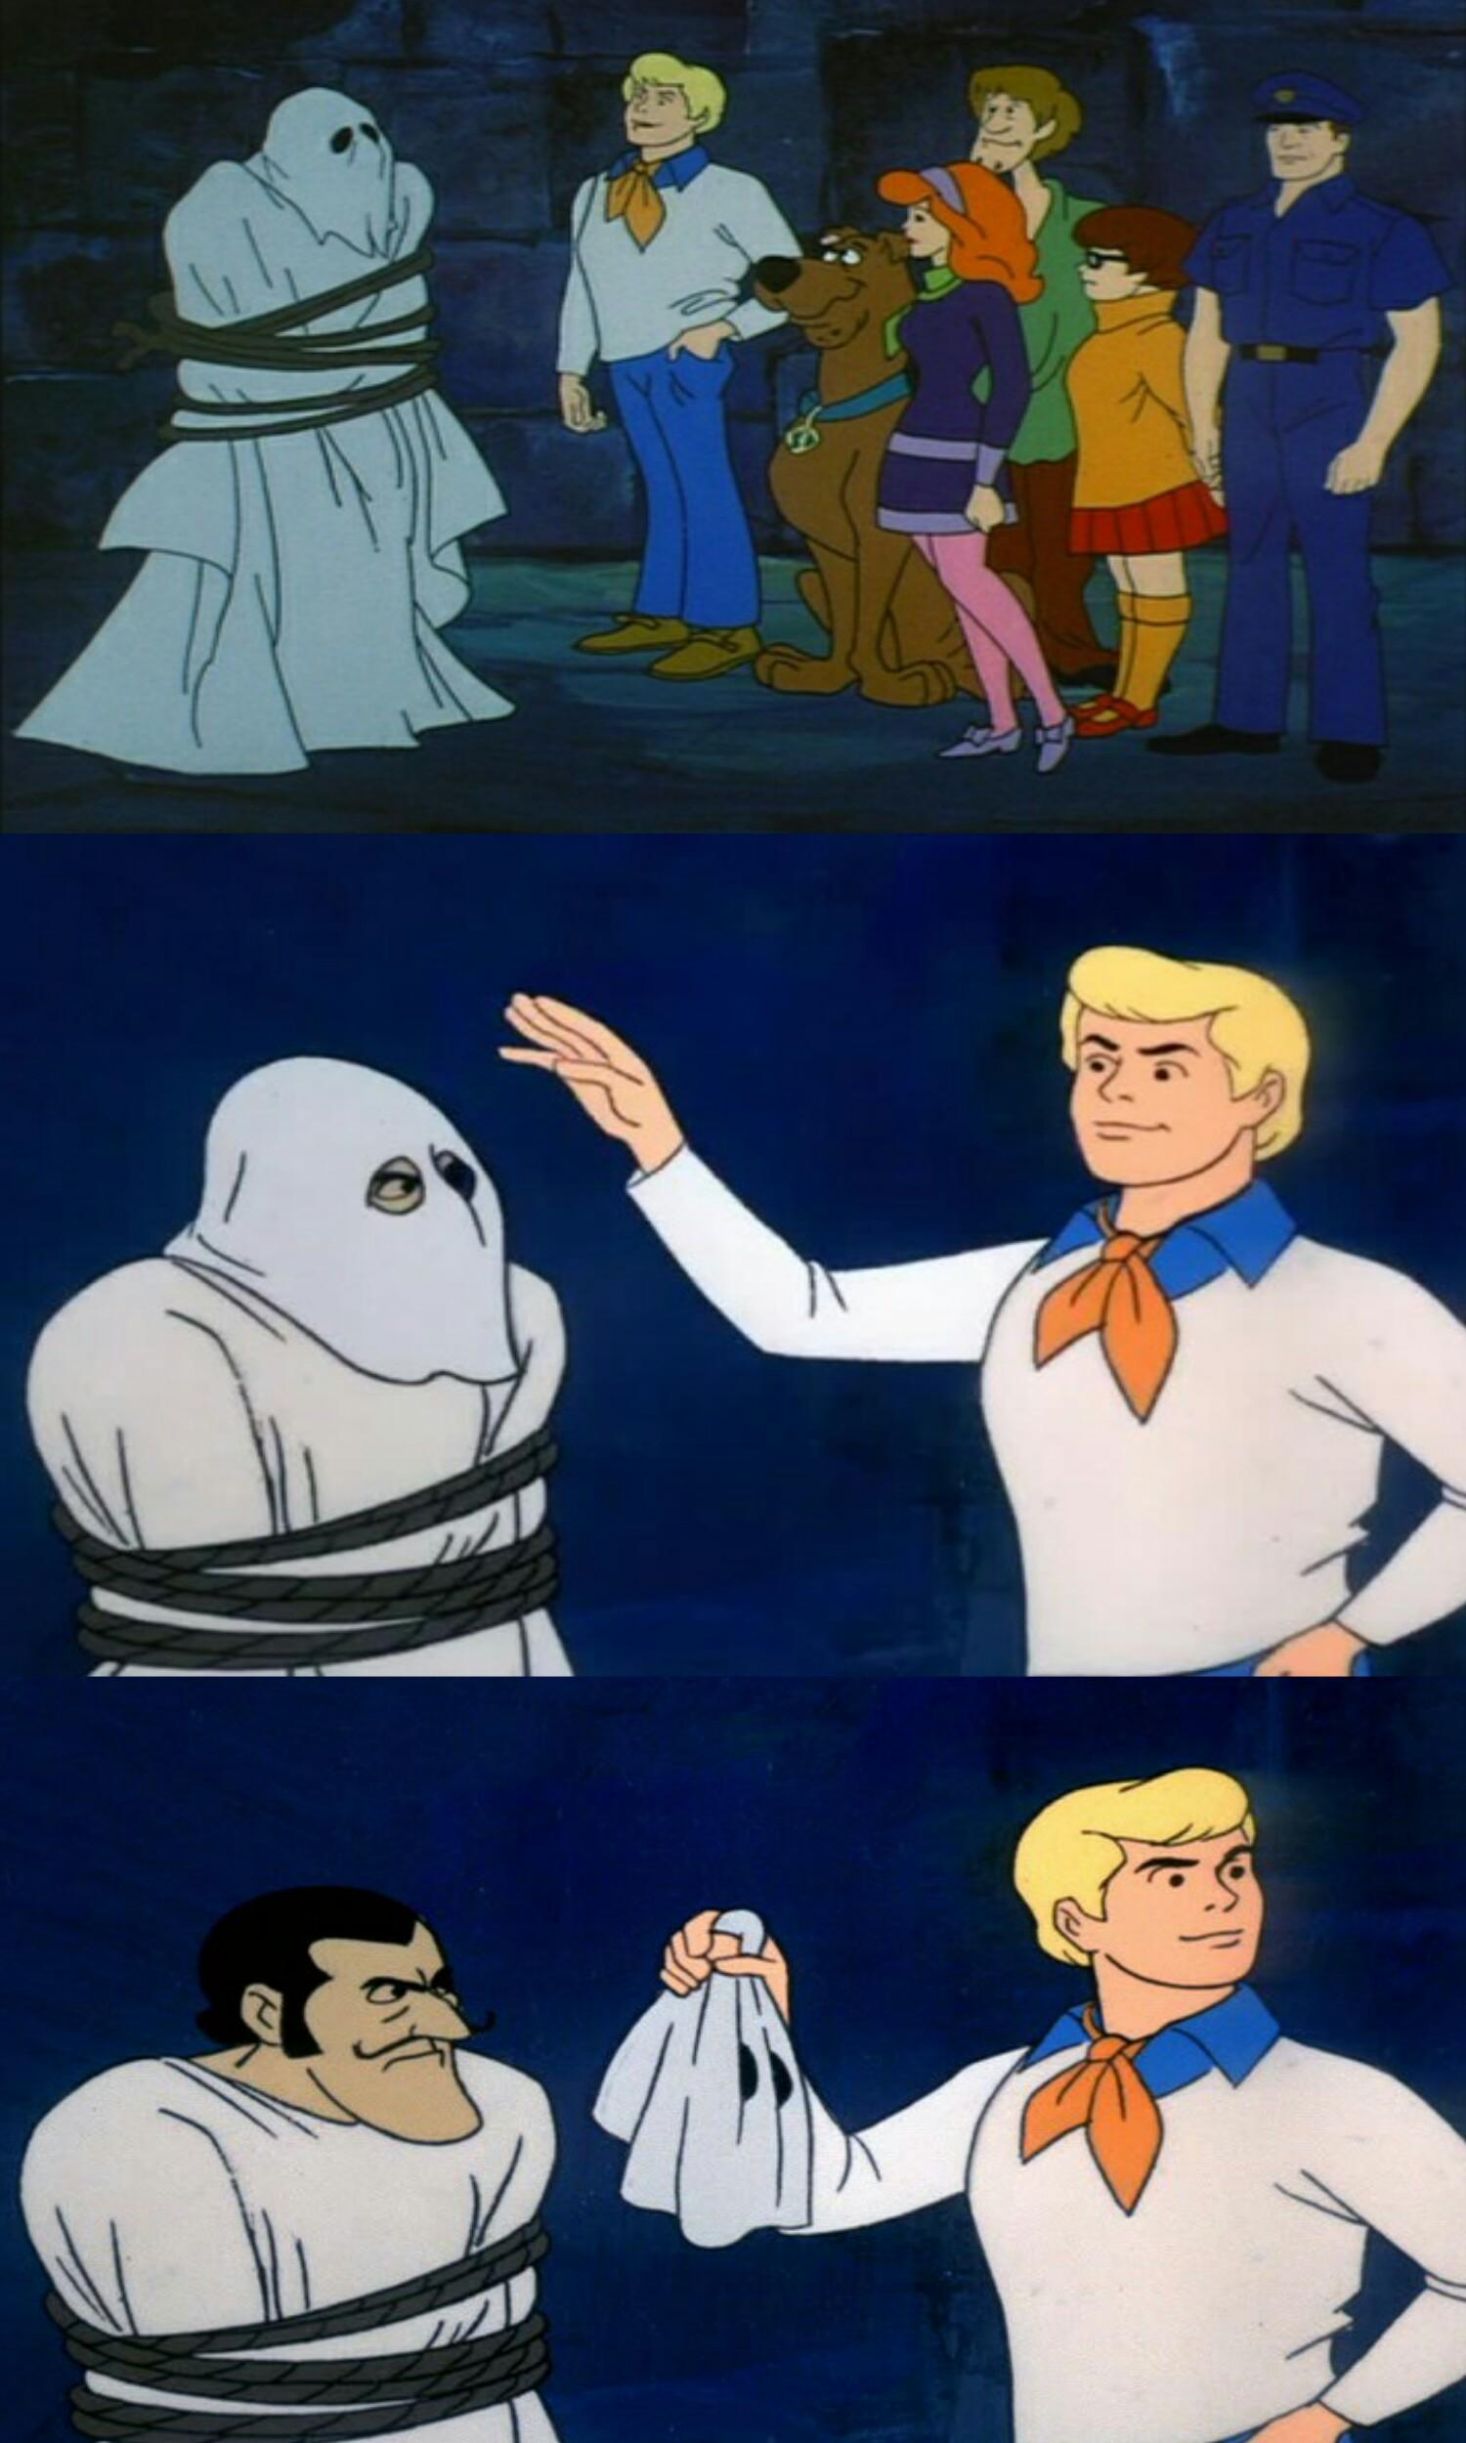 No "Scooby Doo reveal" memes have been featured yet. 